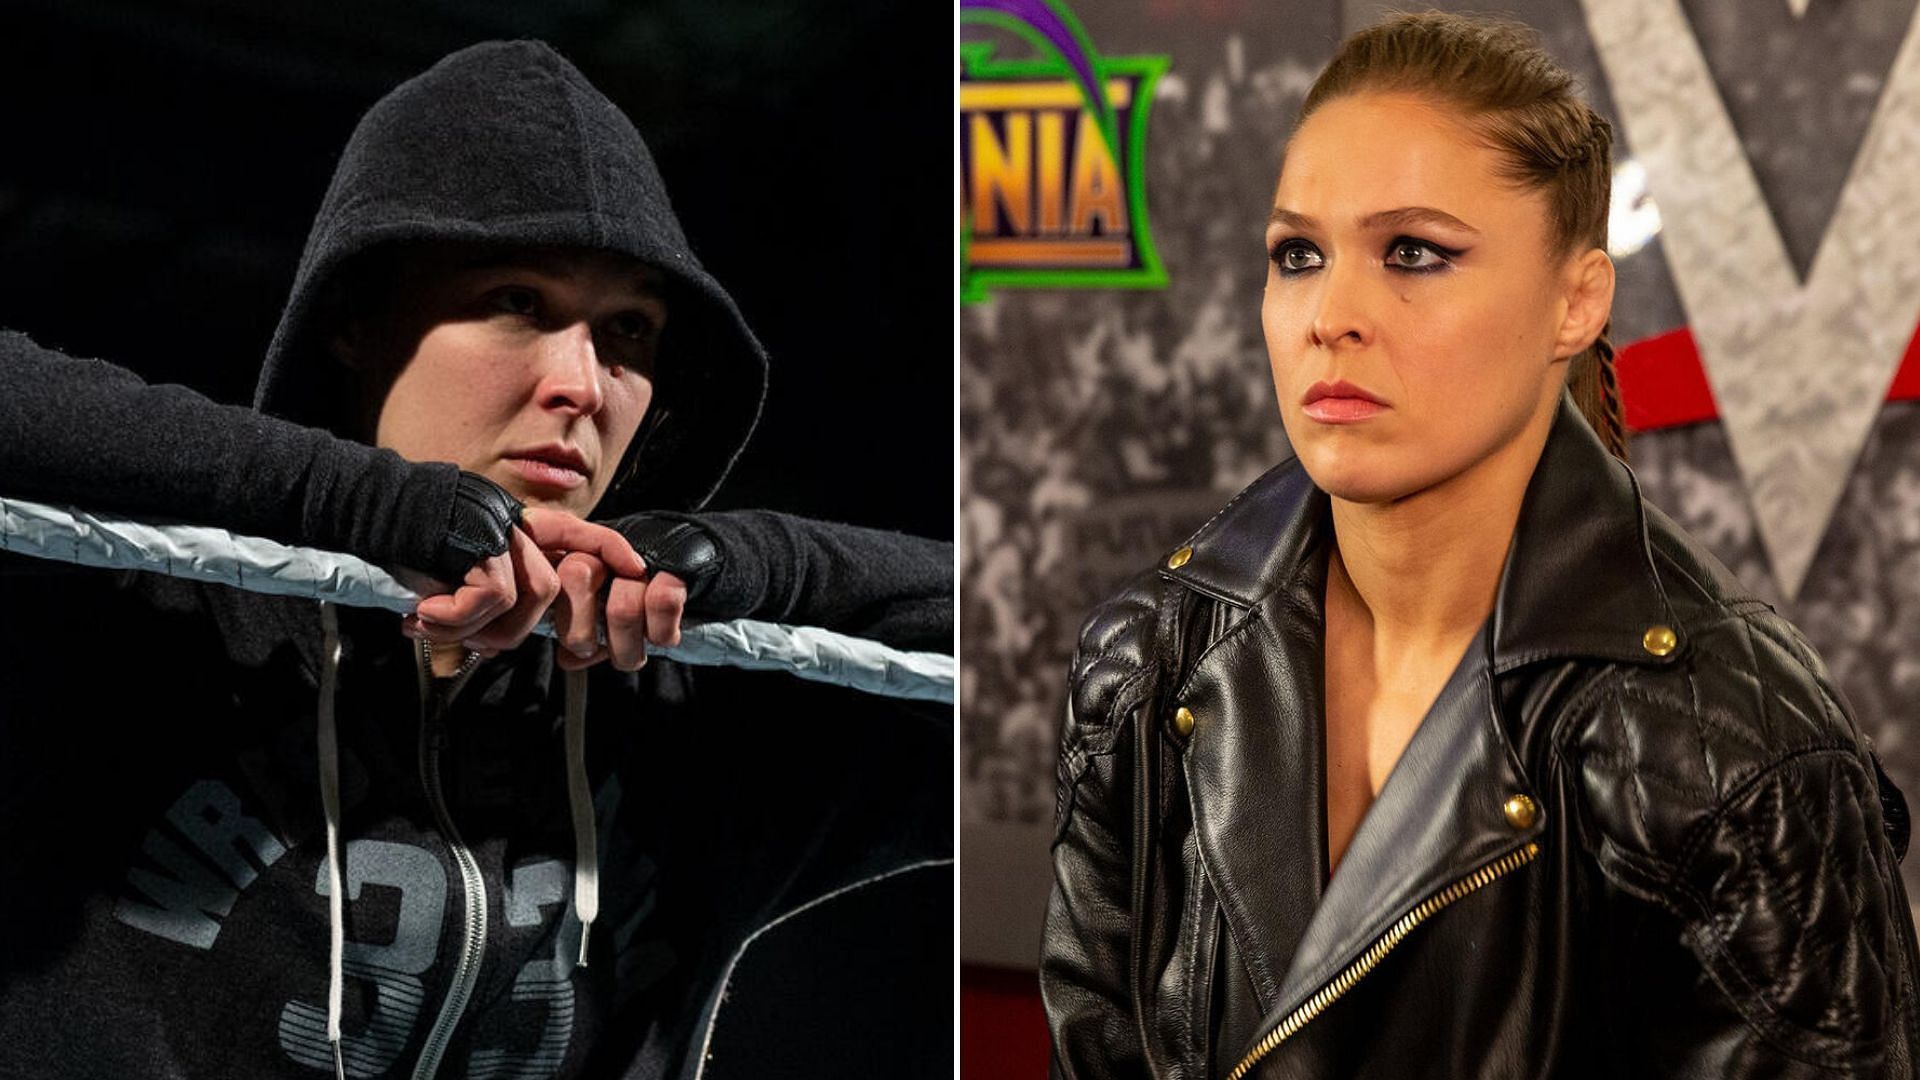 Rousey departed the company last year.